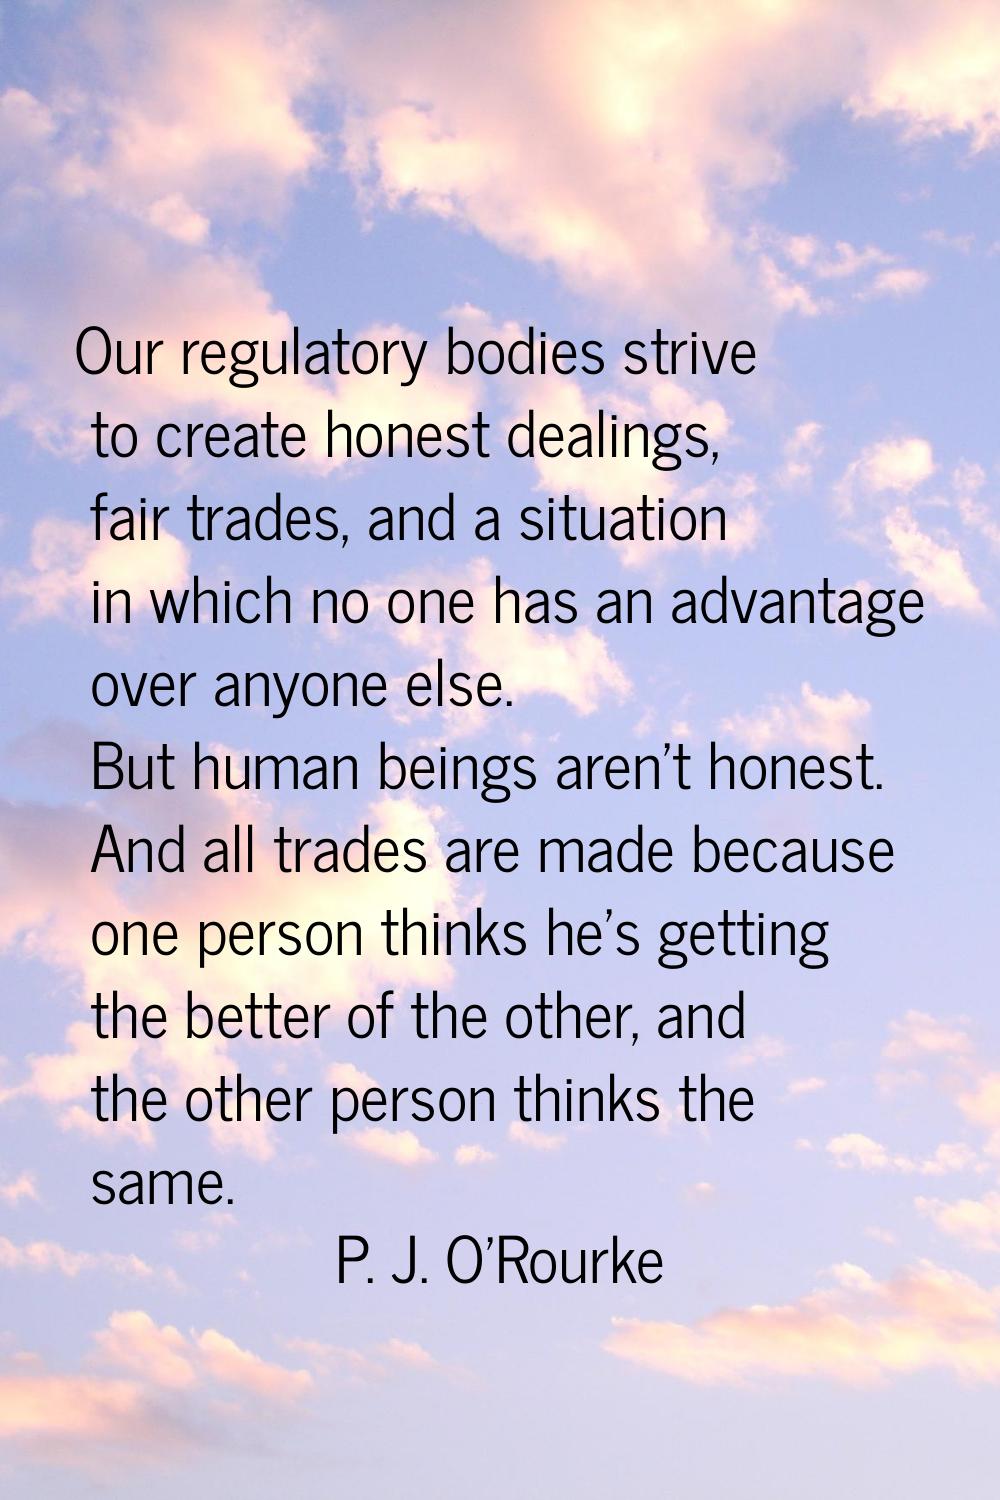 Our regulatory bodies strive to create honest dealings, fair trades, and a situation in which no on